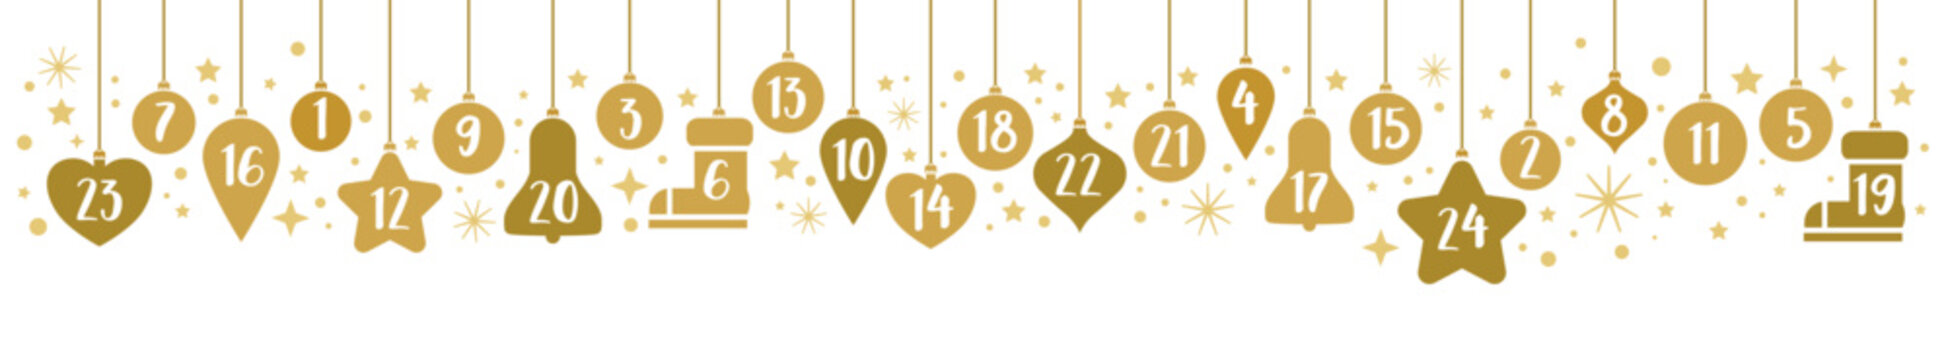 Advent Calendar banner - Christmas baubles golden color with numbers 1 to 24 showing advent calendar for xmas and winter time